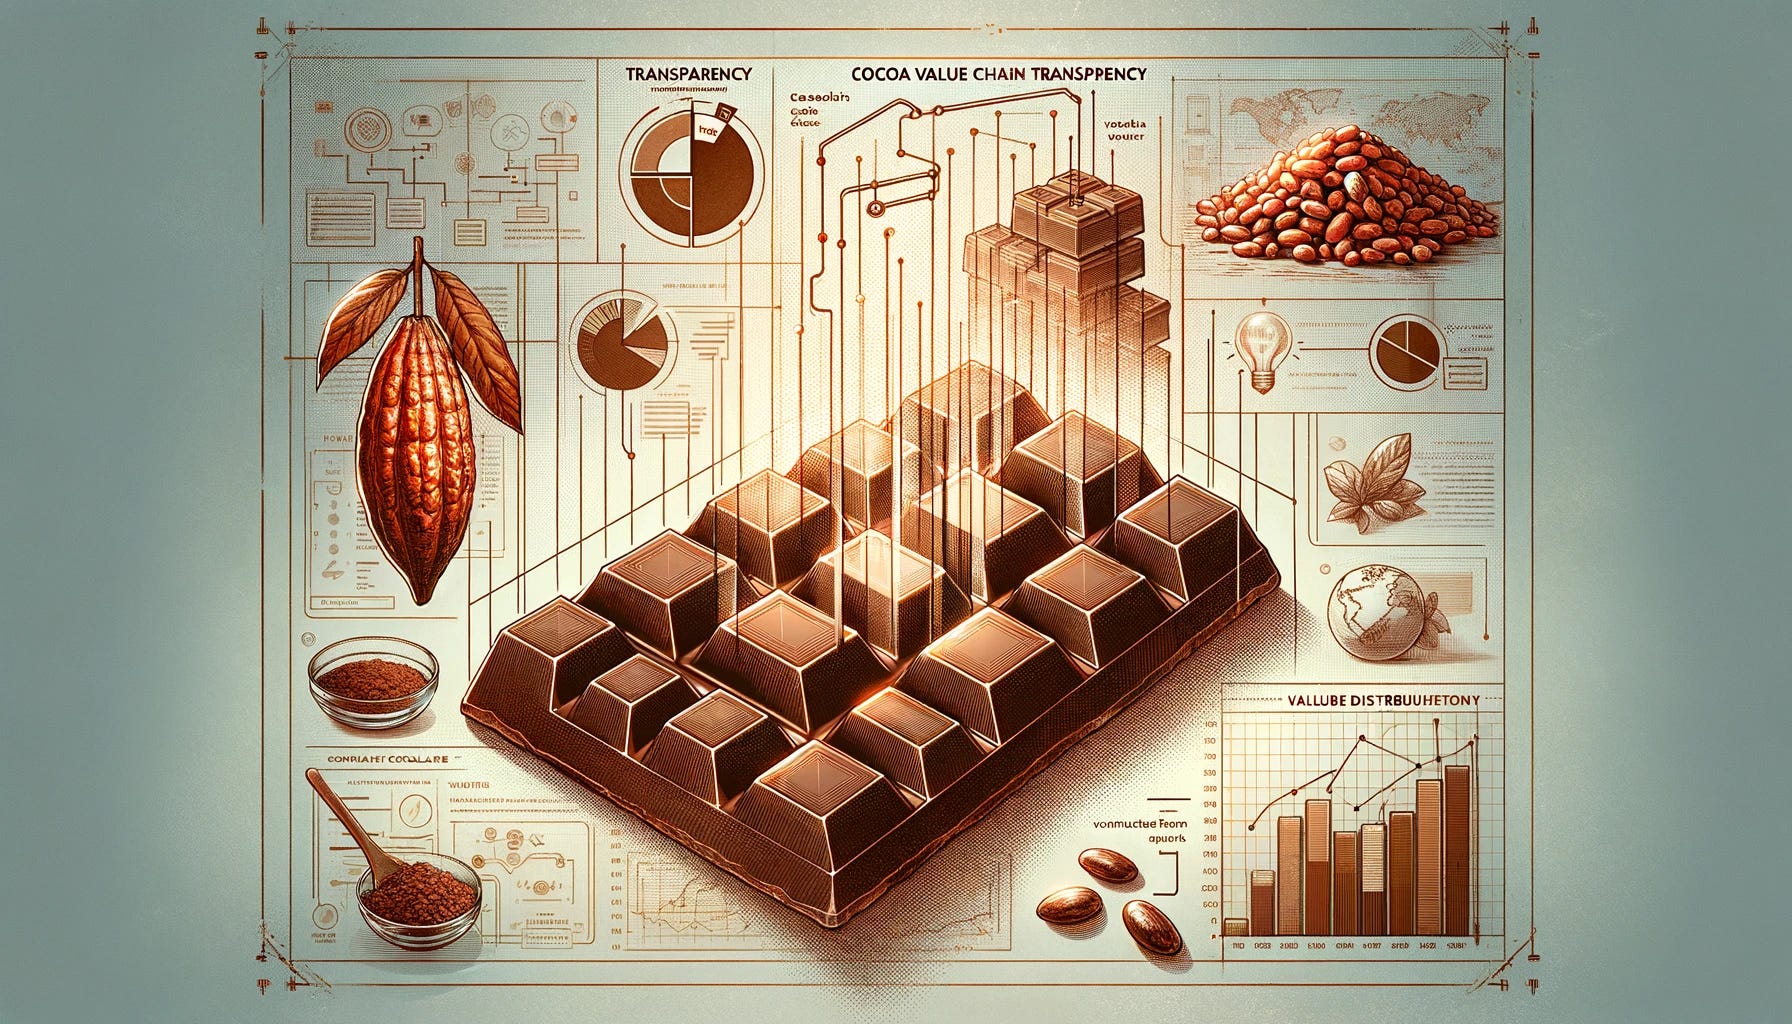 Create a sophisticated and visually compelling banner image for a blog post on cocoa value chain transparency. The image should feature elements that represent transparency and the cocoa-chocolate industry, such as a semi-transparent chocolate bar revealing cocoa beans inside, and a flowchart or graph symbolizing the value distribution from farmer to consumer. The overall design should convey a sense of depth and the need for a deeper look into the industry practices.